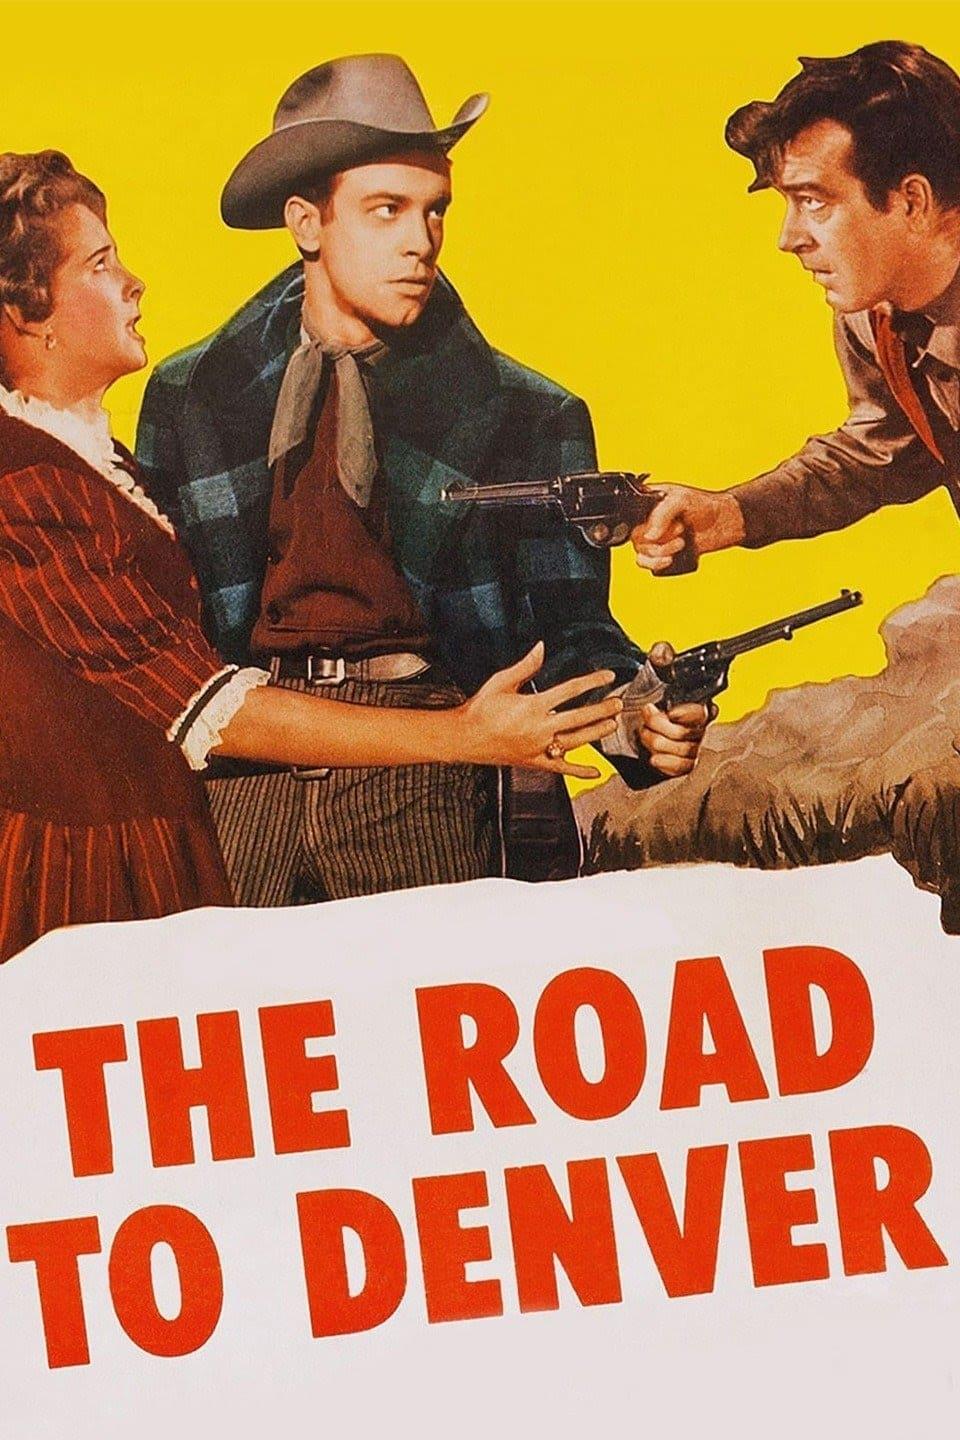 The Road to Denver poster